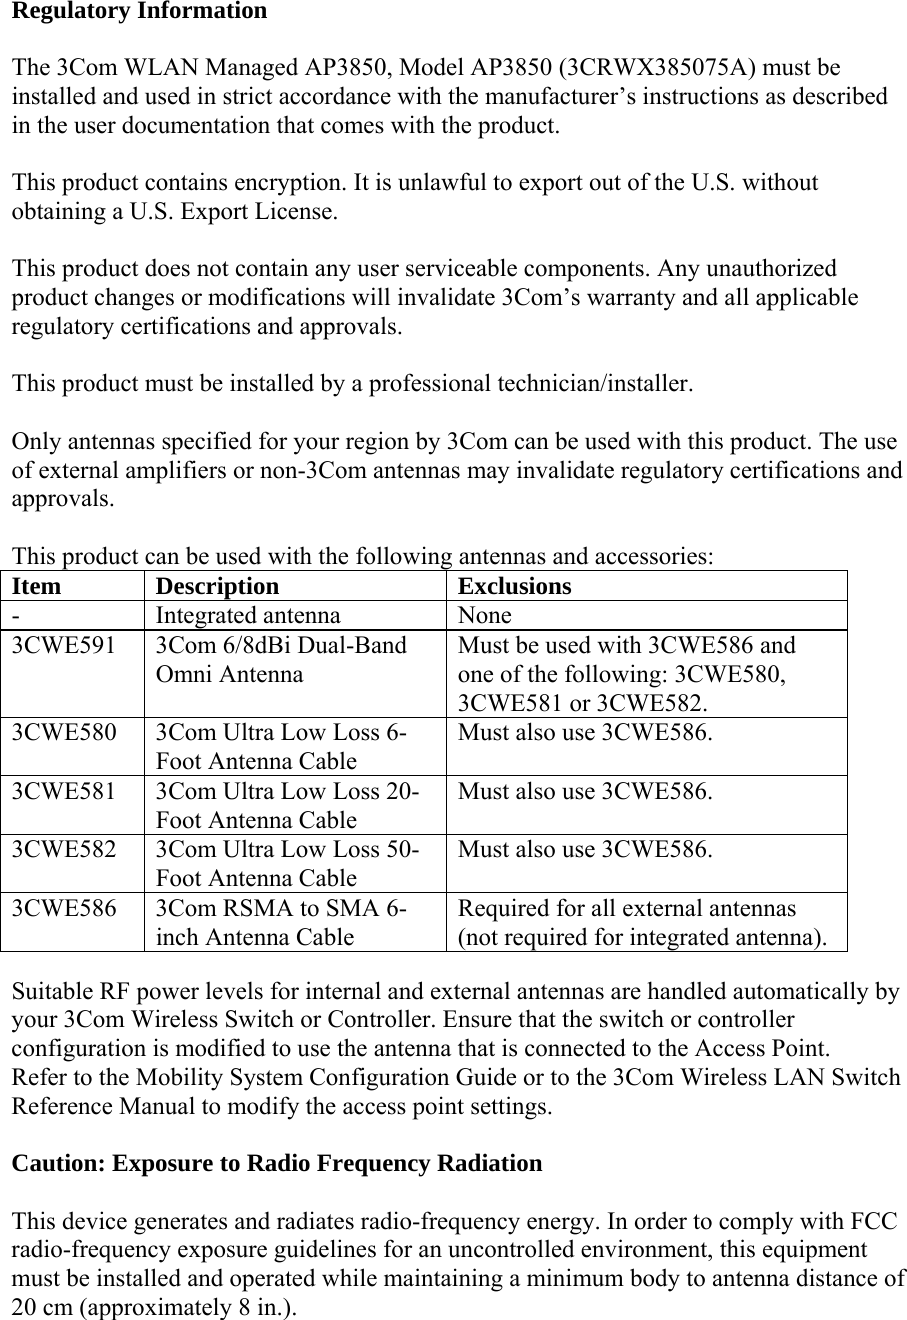 Regulatory Information  The 3Com WLAN Managed AP3850, Model AP3850 (3CRWX385075A) must be installed and used in strict accordance with the manufacturer’s instructions as described in the user documentation that comes with the product.  This product contains encryption. It is unlawful to export out of the U.S. without obtaining a U.S. Export License.  This product does not contain any user serviceable components. Any unauthorized product changes or modifications will invalidate 3Com’s warranty and all applicable regulatory certifications and approvals.  This product must be installed by a professional technician/installer.  Only antennas specified for your region by 3Com can be used with this product. The use of external amplifiers or non-3Com antennas may invalidate regulatory certifications and approvals.  This product can be used with the following antennas and accessories: Item Description  Exclusions - Integrated antenna None 3CWE591  3Com 6/8dBi Dual-Band Omni Antenna Must be used with 3CWE586 and one of the following: 3CWE580, 3CWE581 or 3CWE582. 3CWE580  3Com Ultra Low Loss 6-Foot Antenna Cable Must also use 3CWE586. 3CWE581  3Com Ultra Low Loss 20-Foot Antenna Cable   Must also use 3CWE586. 3CWE582  3Com Ultra Low Loss 50-Foot Antenna Cable Must also use 3CWE586. 3CWE586  3Com RSMA to SMA 6-inch Antenna Cable Required for all external antennas (not required for integrated antenna).  Suitable RF power levels for internal and external antennas are handled automatically by your 3Com Wireless Switch or Controller. Ensure that the switch or controller configuration is modified to use the antenna that is connected to the Access Point.  Refer to the Mobility System Configuration Guide or to the 3Com Wireless LAN Switch Reference Manual to modify the access point settings.  Caution: Exposure to Radio Frequency Radiation  This device generates and radiates radio-frequency energy. In order to comply with FCC radio-frequency exposure guidelines for an uncontrolled environment, this equipment must be installed and operated while maintaining a minimum body to antenna distance of 20 cm (approximately 8 in.). 